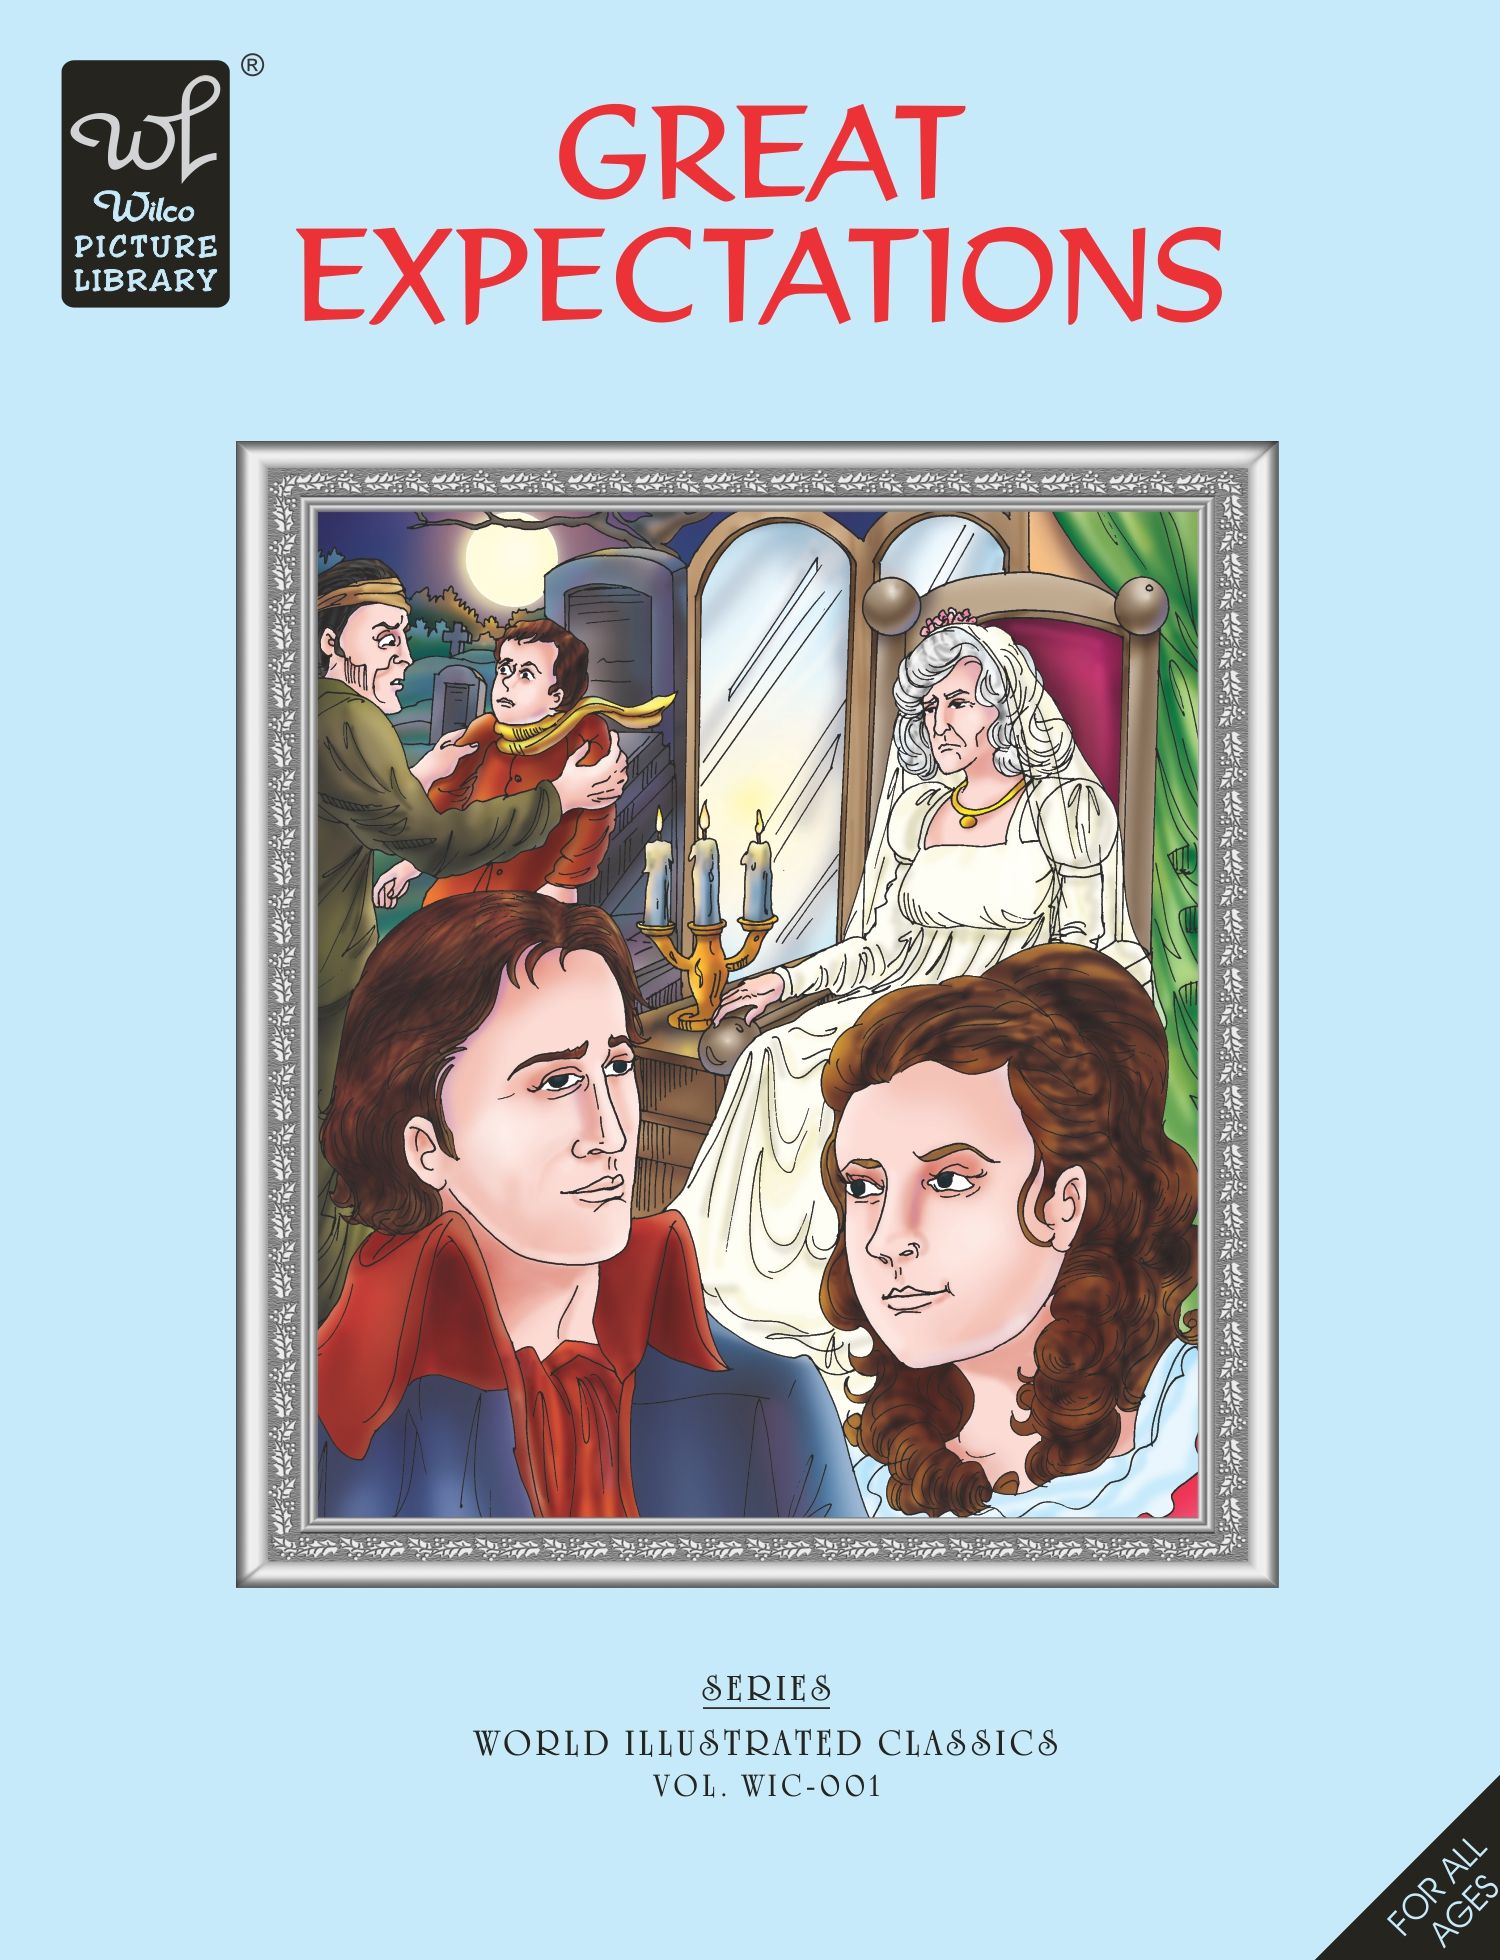 WPL:Great Expectations